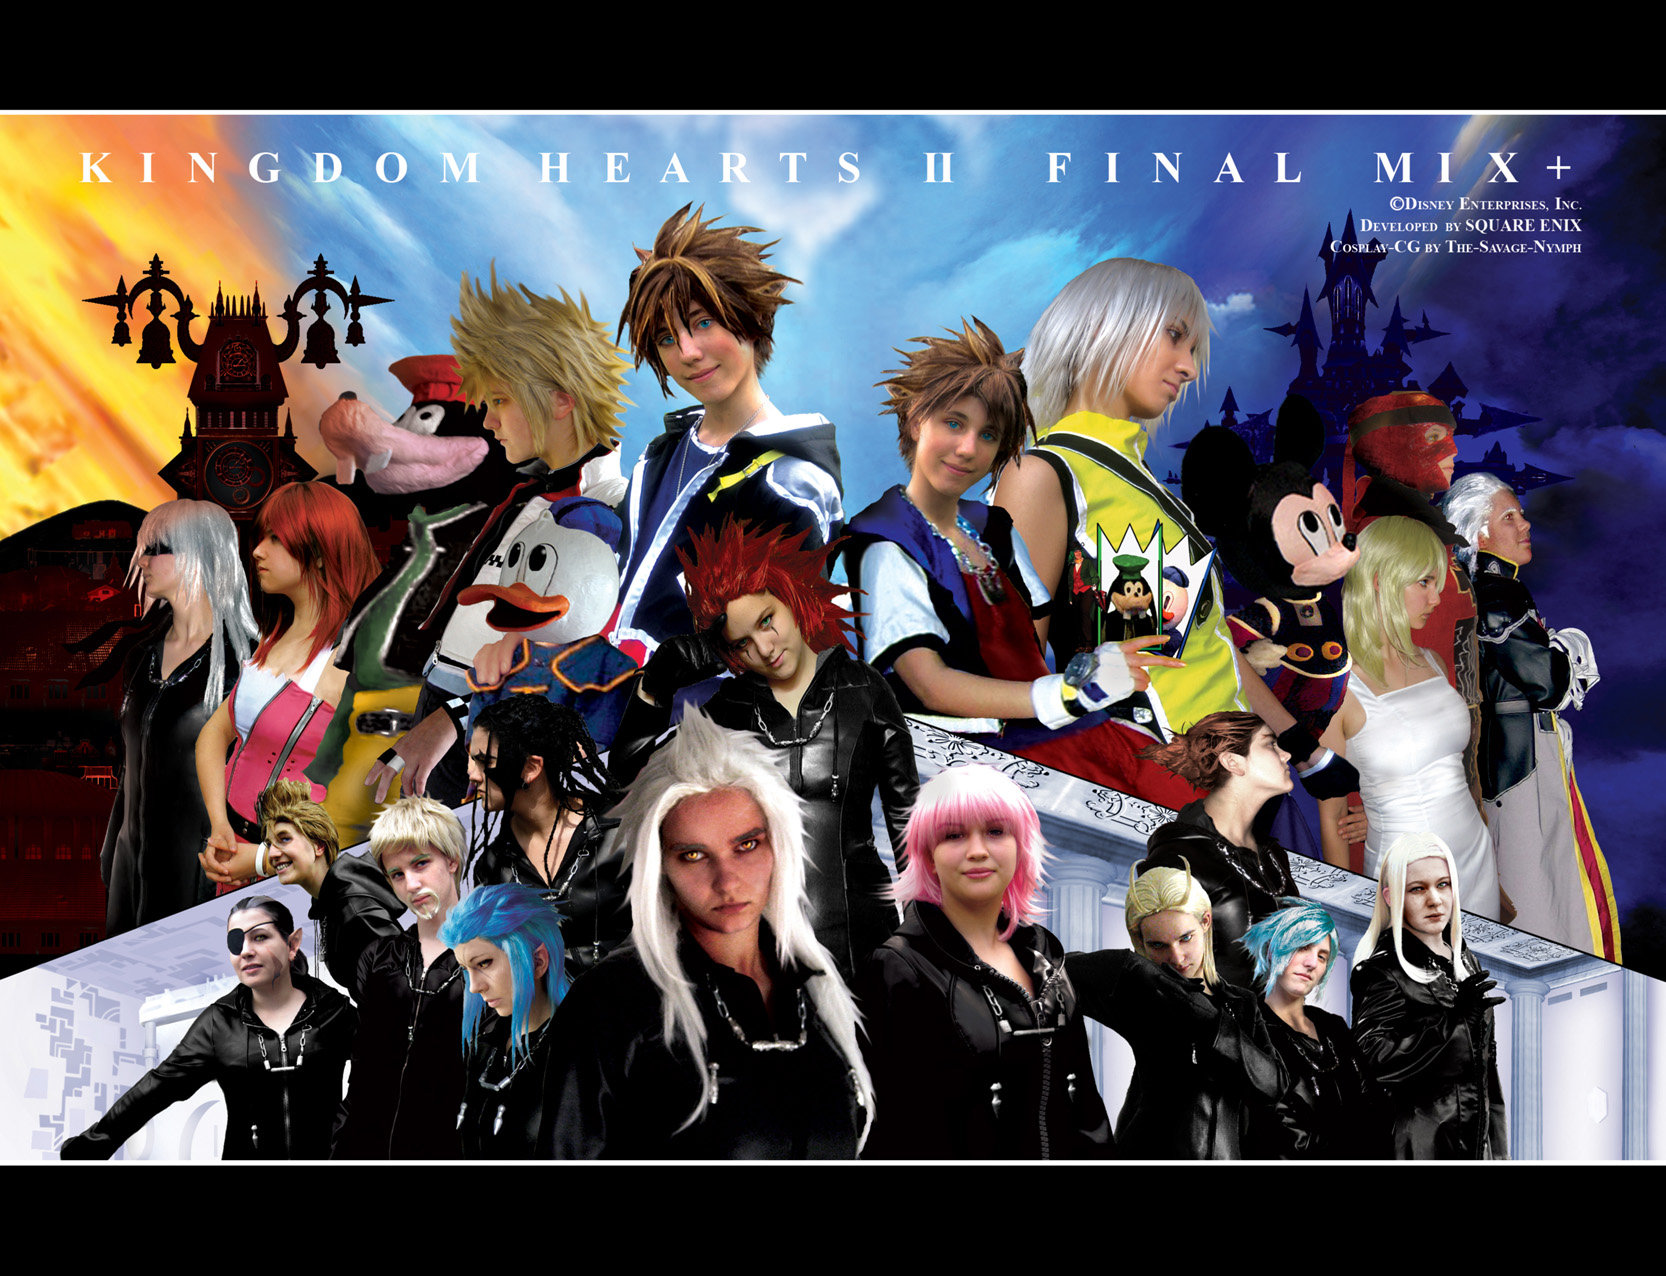 Kingdom Hearts II   Final Mix by The Savage Nymph on